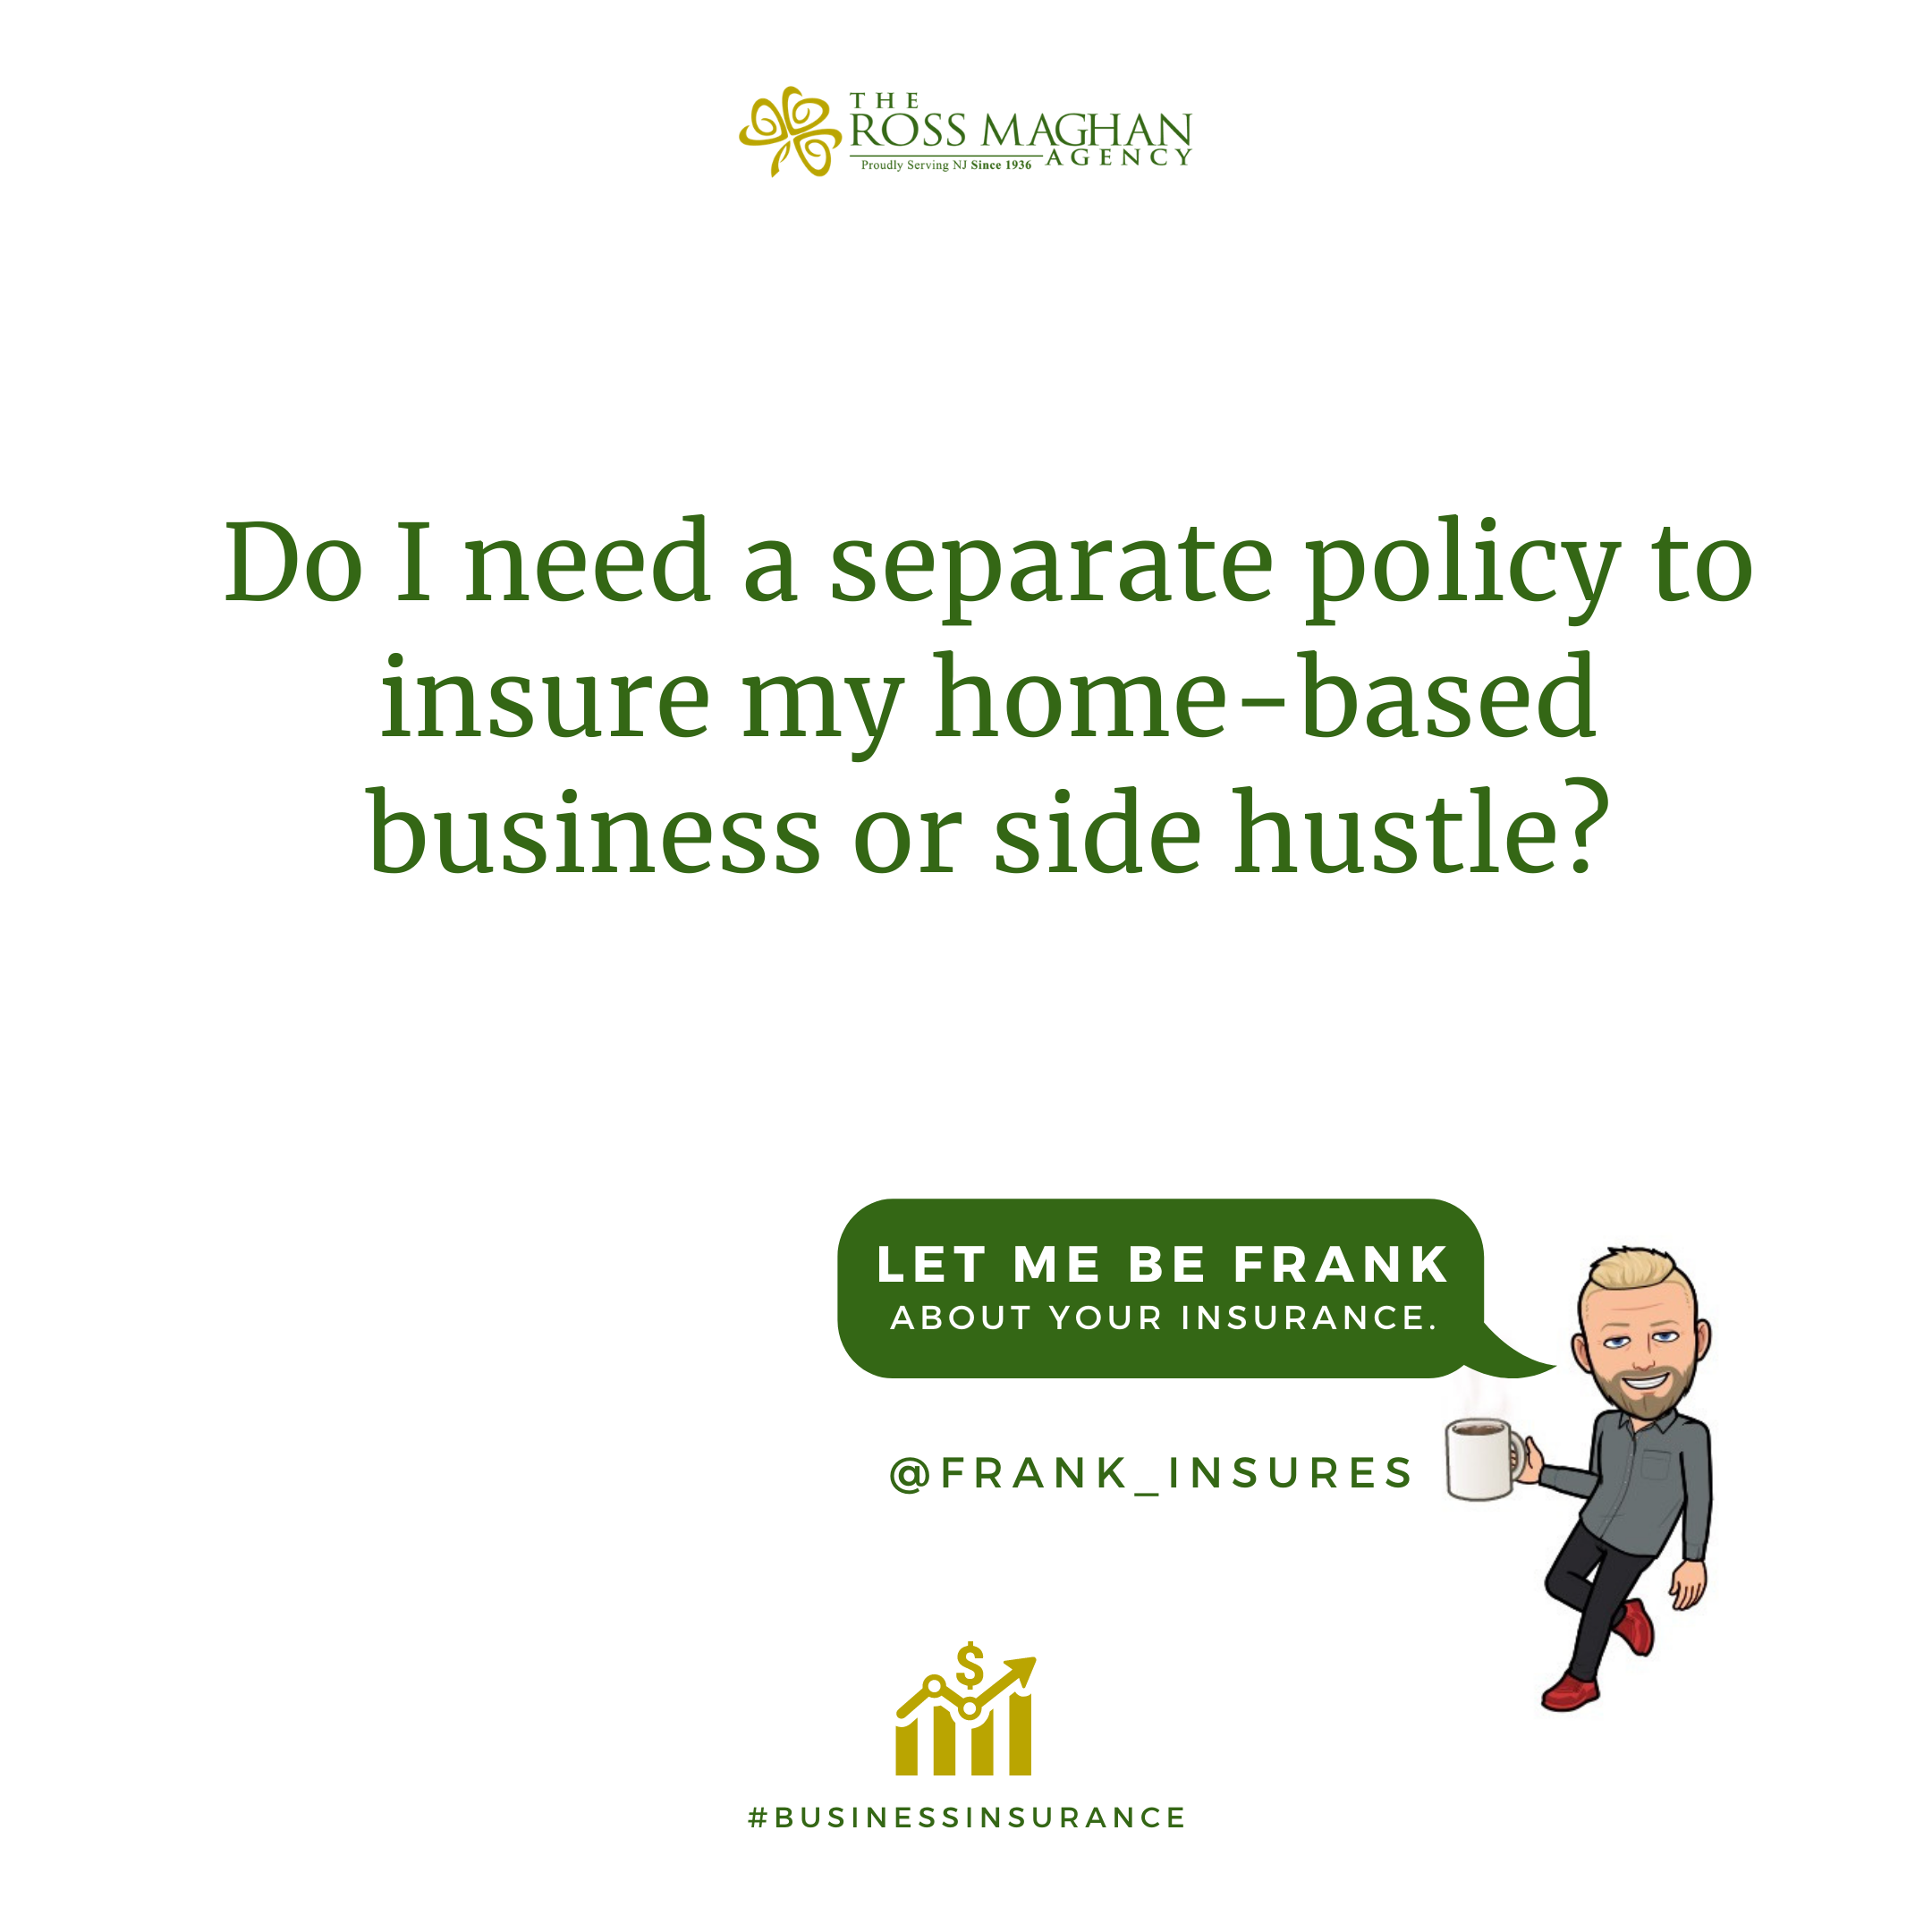 Featured image for “Do I need a separate policy to insure my home-based business?”